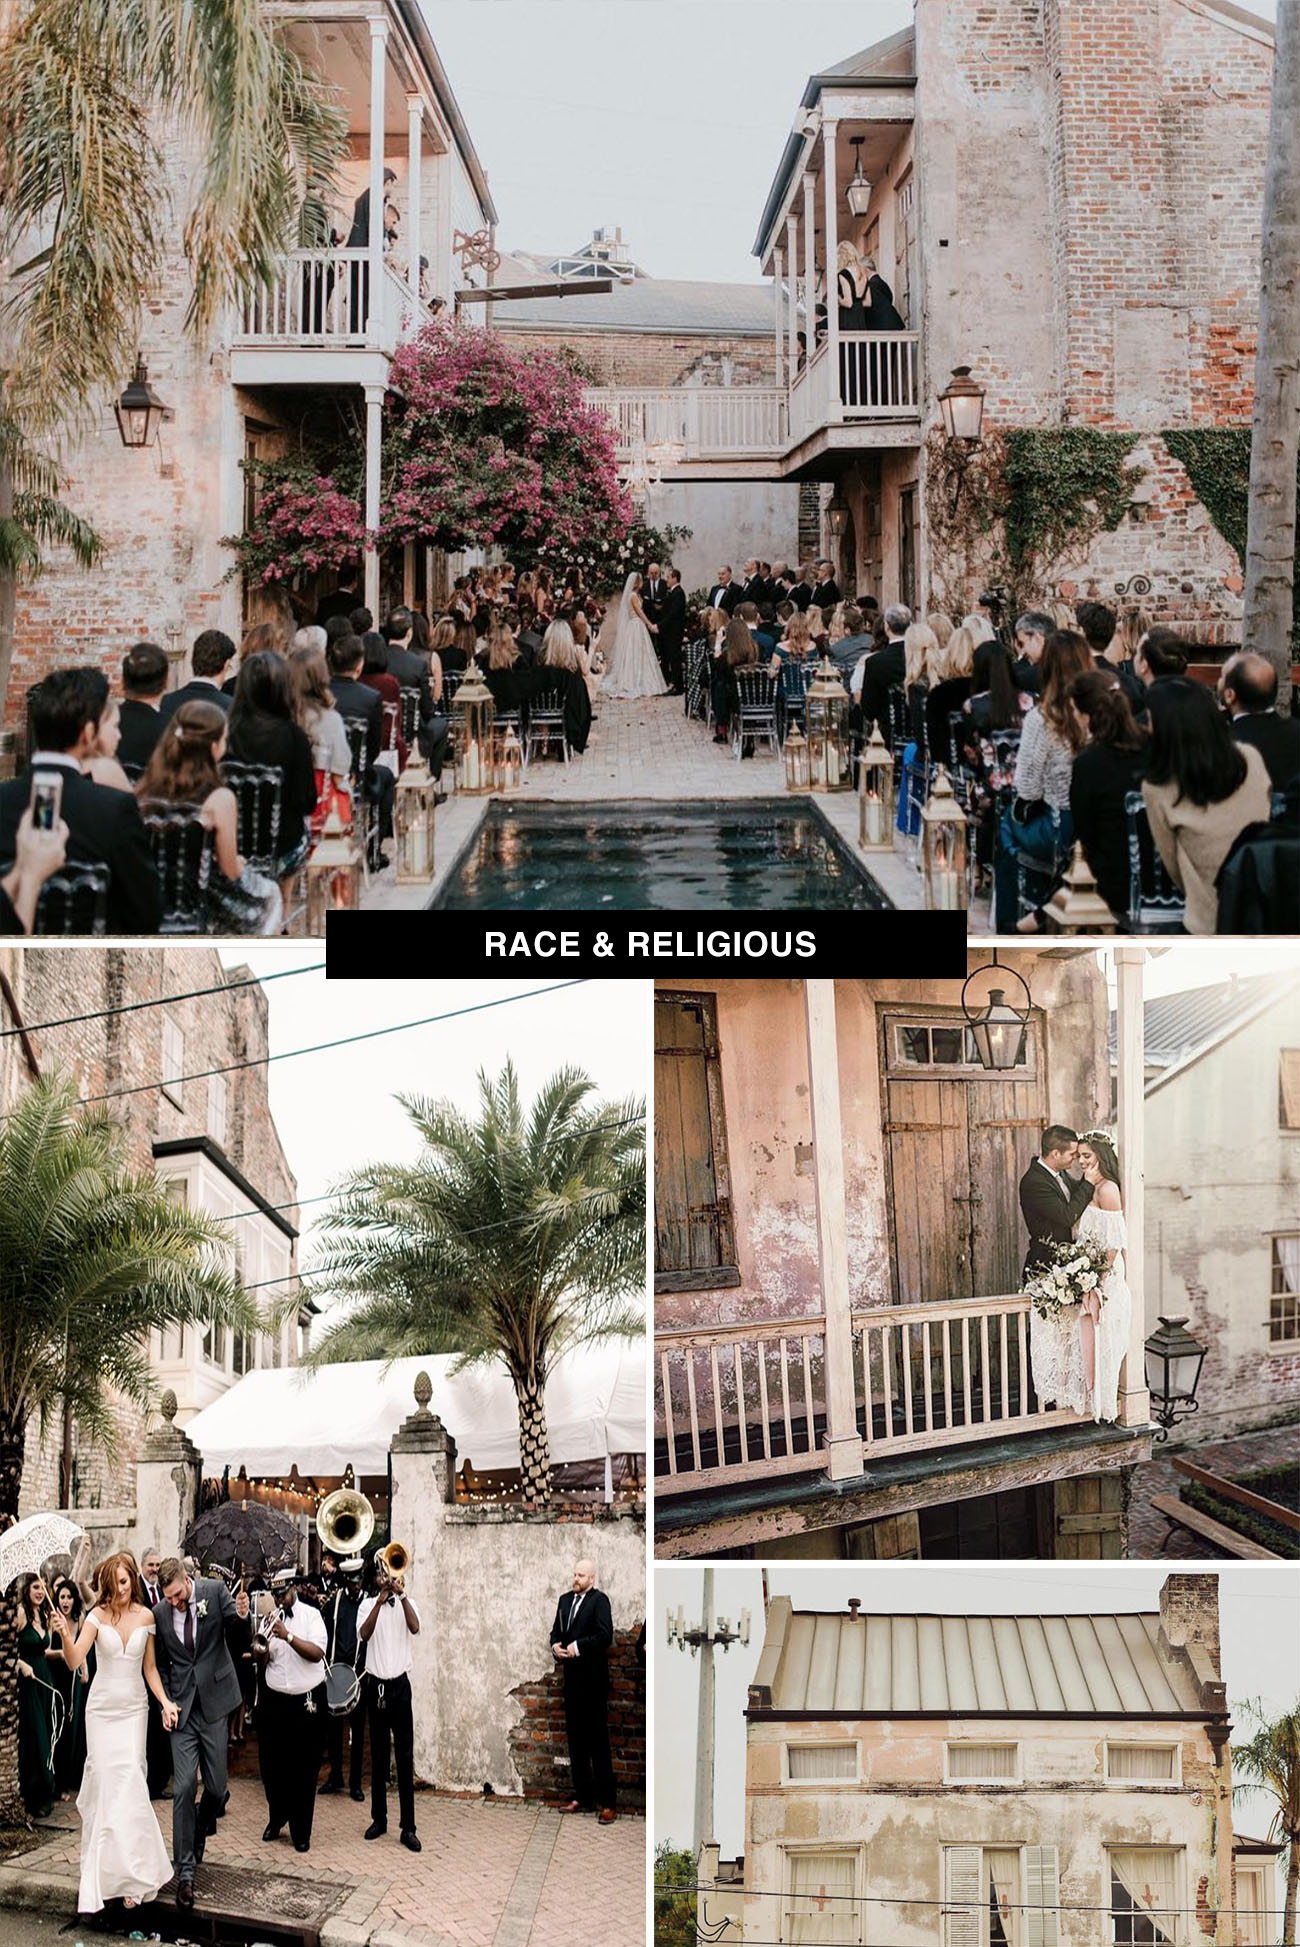 Race & Religious wedding venue in New Orleans is such a New Orleans place to get married for locals and destination couples